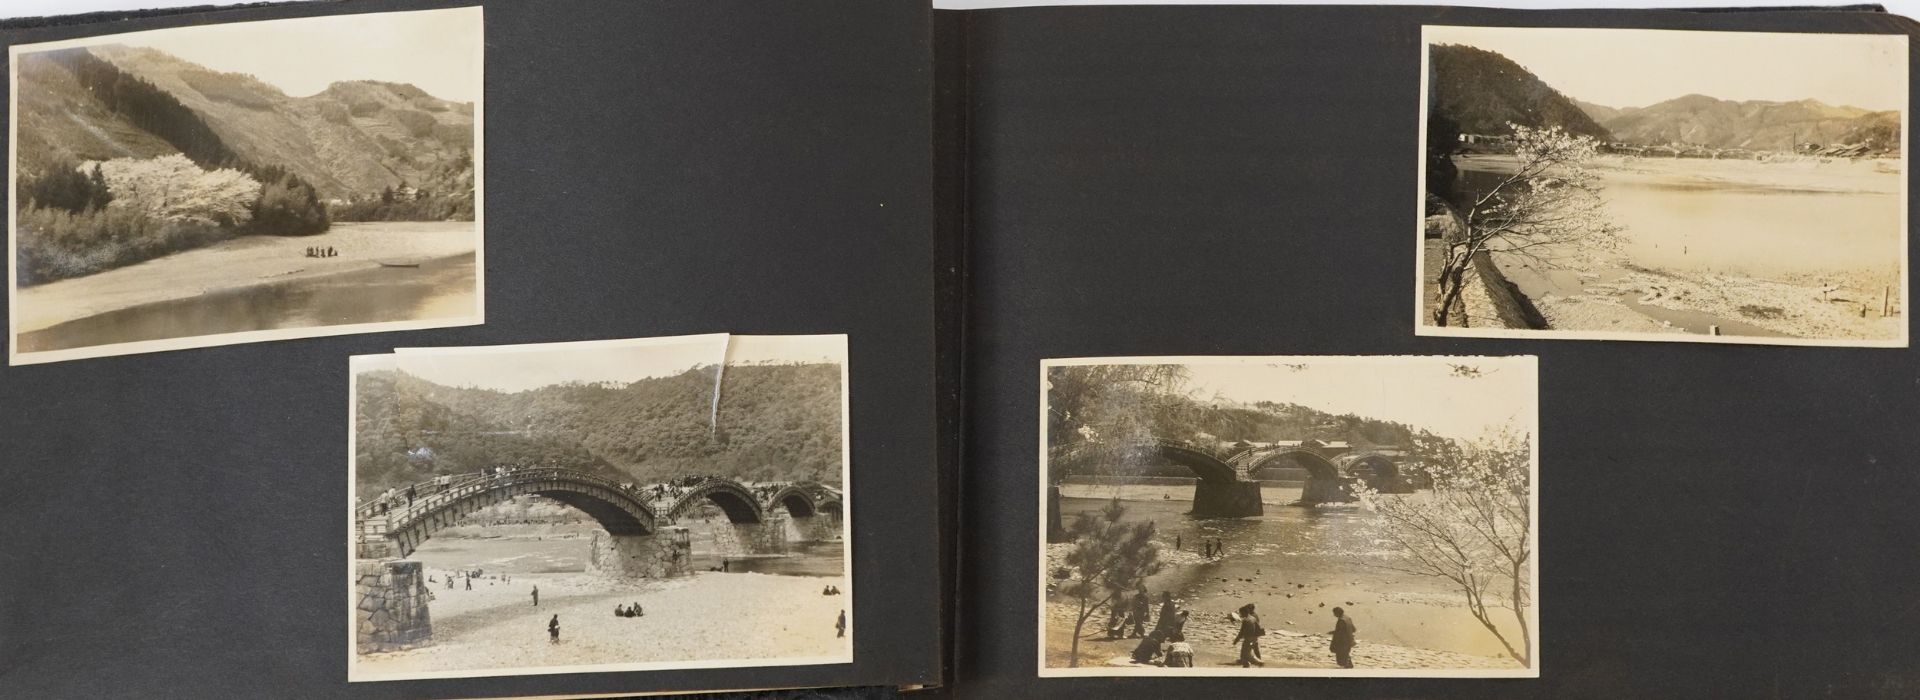 Early 20th century black and white photographs of Asia arranged in an album, probably China, - Image 2 of 24